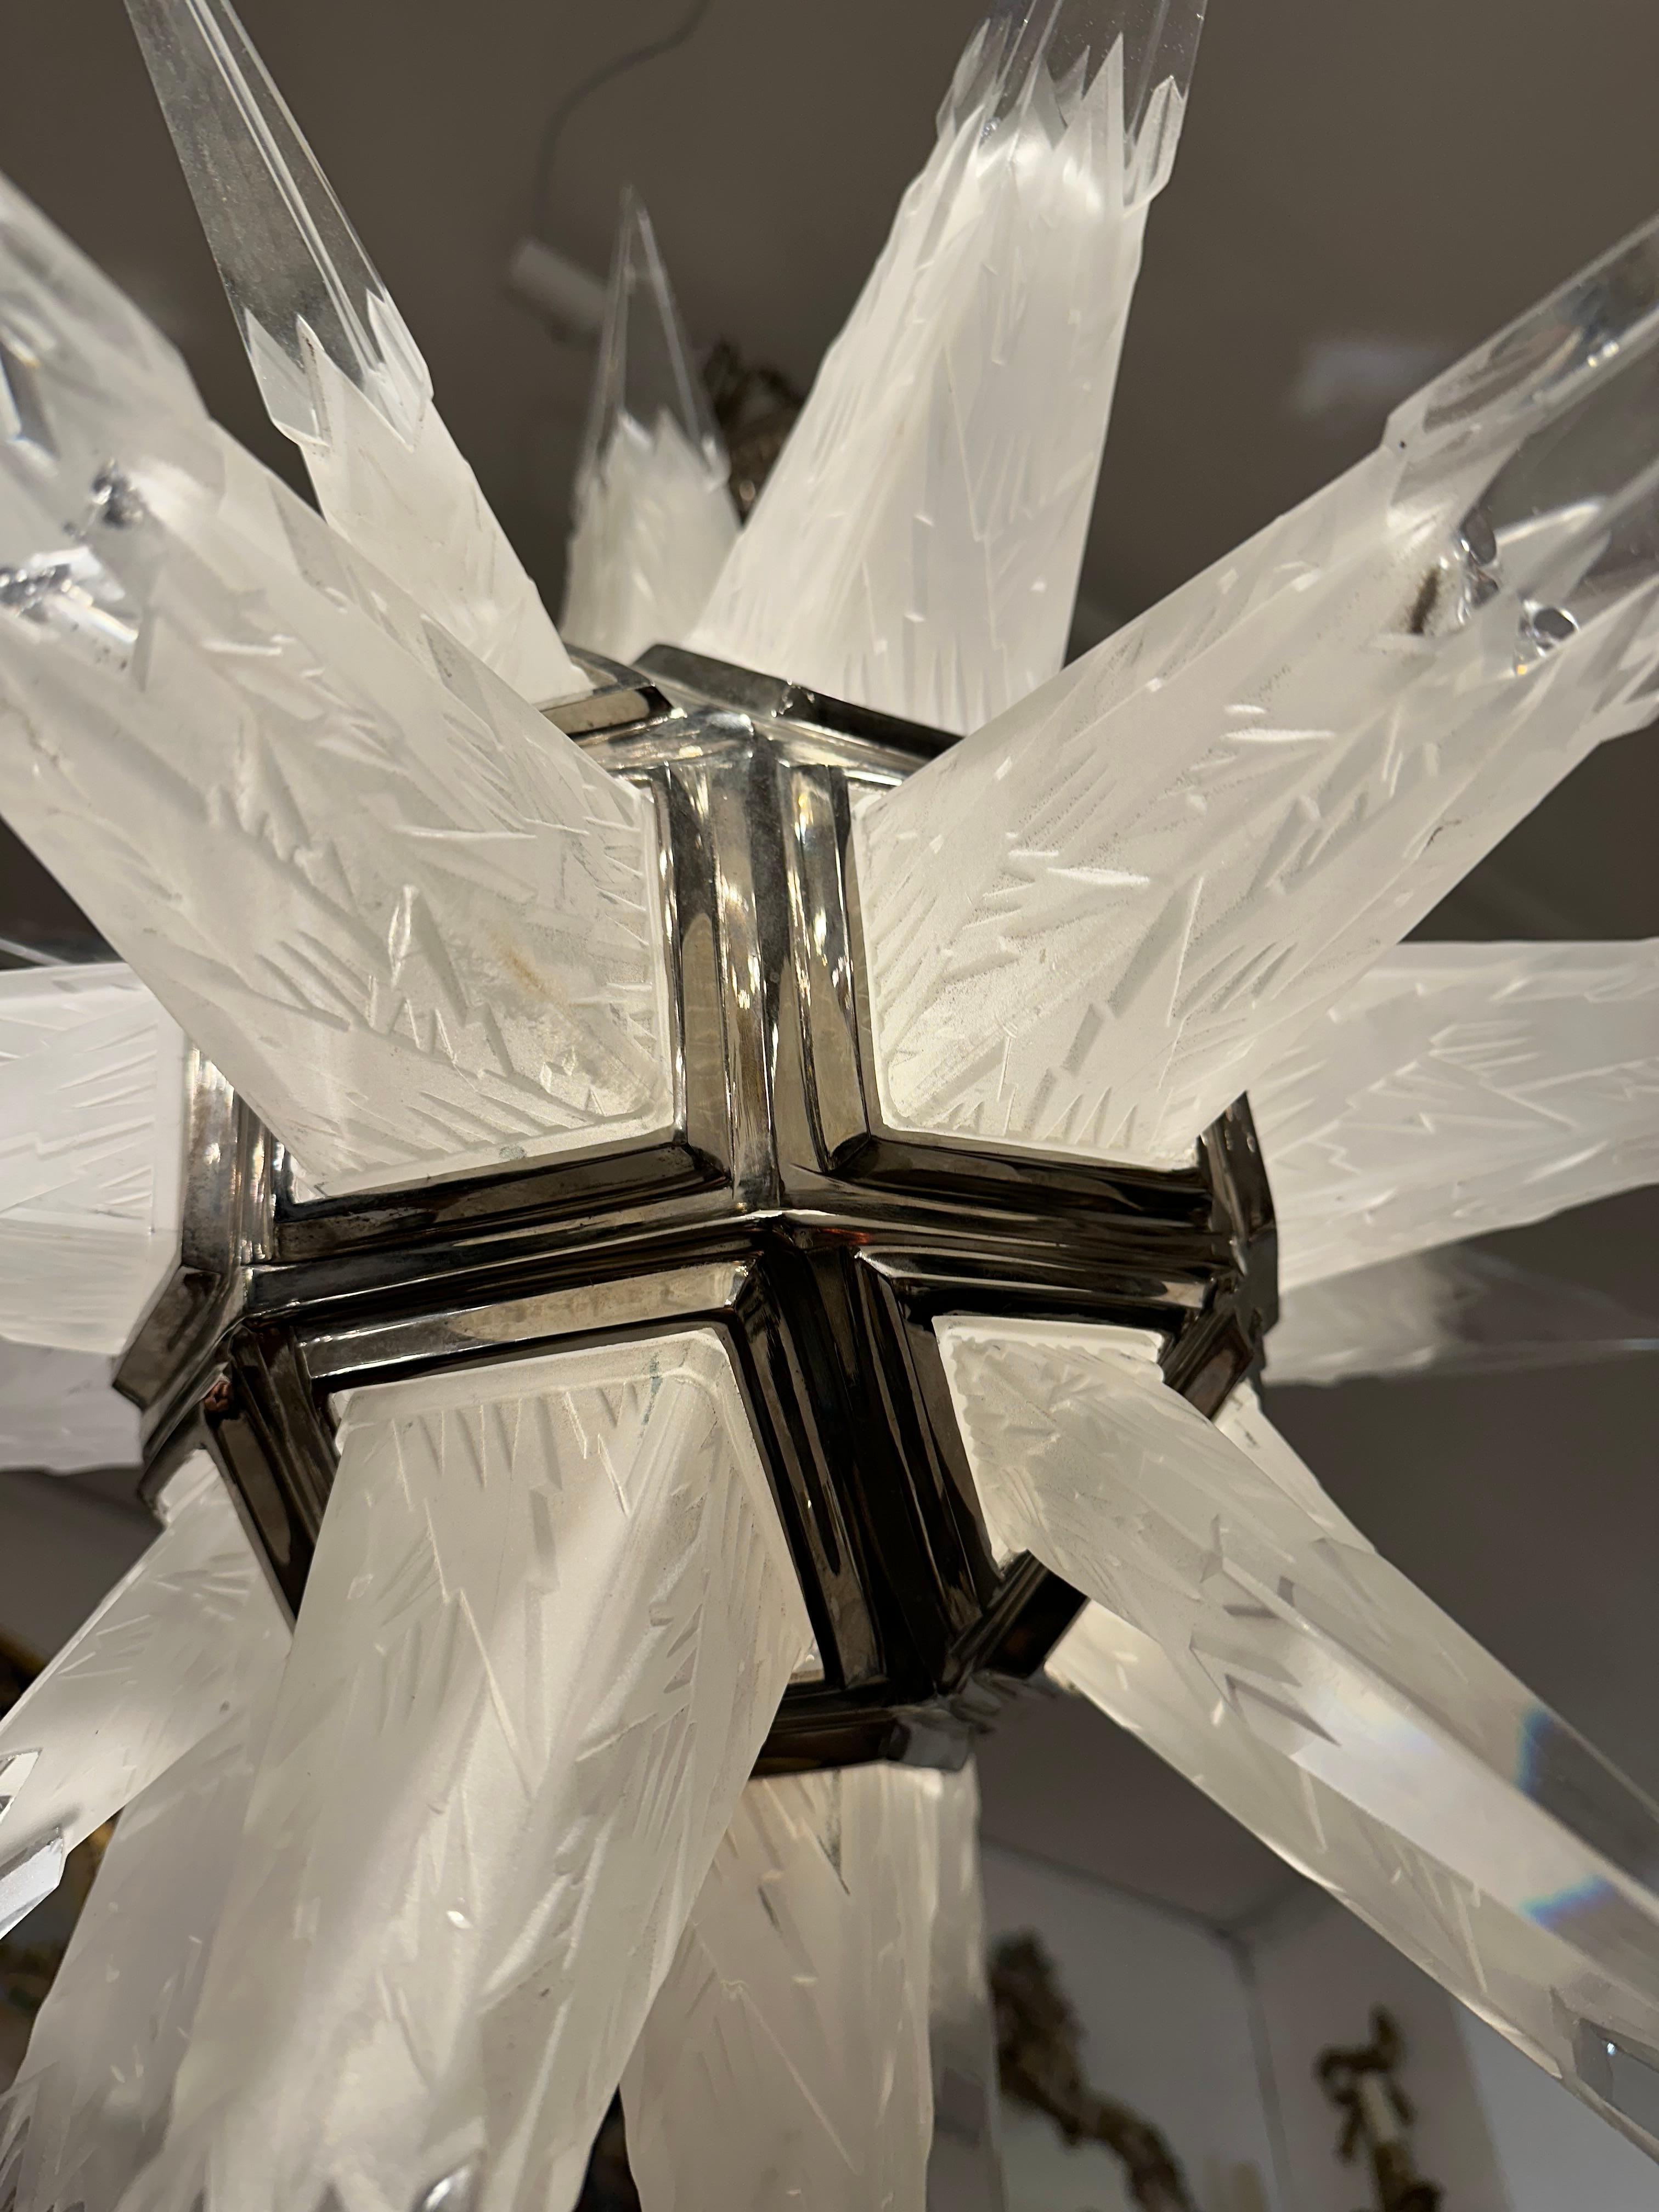 A striking, highly decorative pair of rare rock crystal ceiling lights with detailed etching along each crystal spike. Exceptional lights that would be sure to create a real talking point. The lights can be re-wired according to the countries